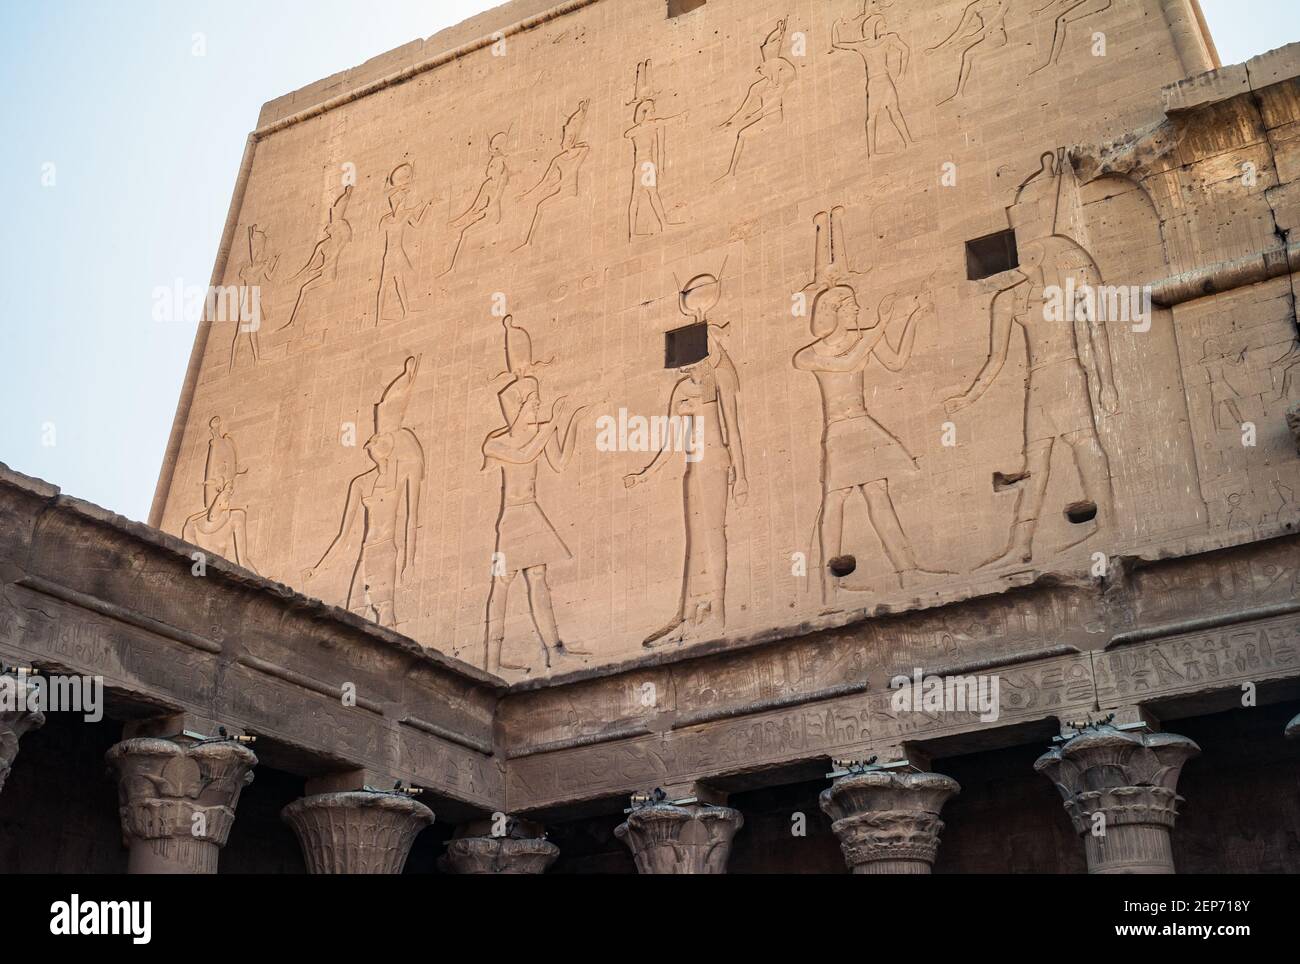 Edfu Temple - Northern Facade of the East Wing of the Great Pylon with Reliefs of King Ptolemy XII interacting with the Gods Horus and Hathor. Stock Photo